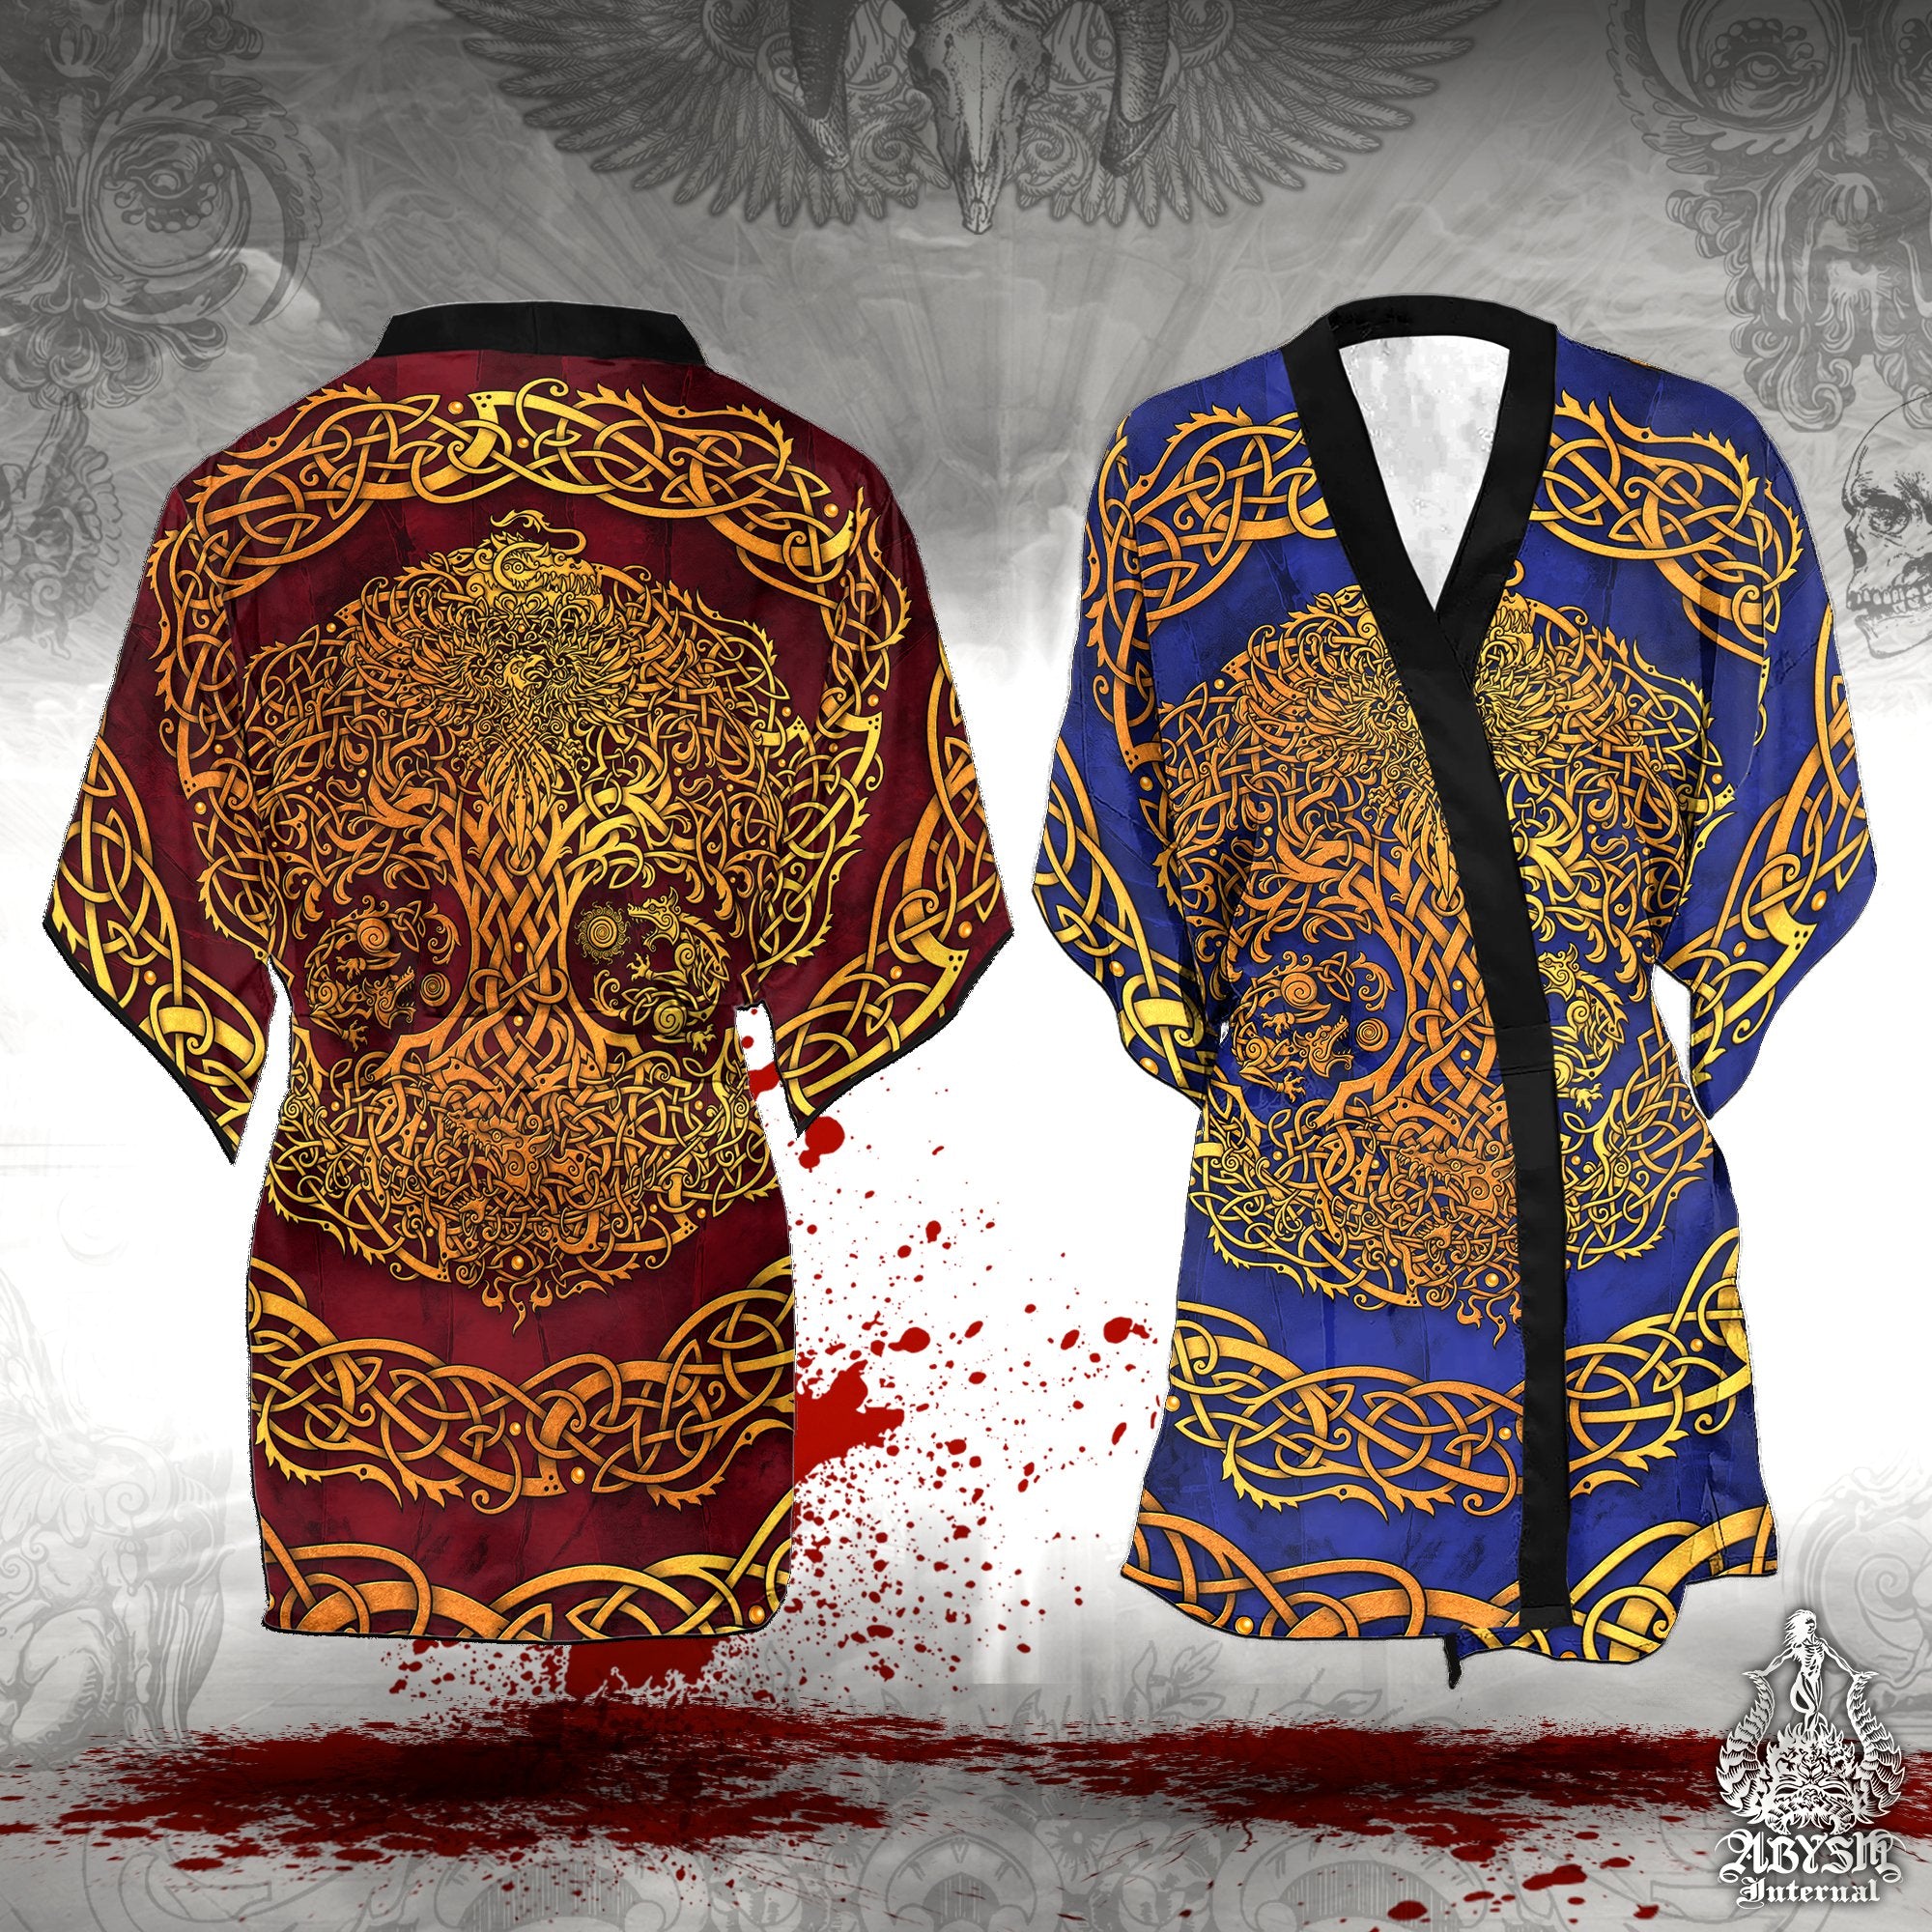 Viking Short Kimono Robe, Beach Party Outfit, Yggdrasil Coverup, Summer Festival, Norse Alternative Clothing, Unisex - Tree of Life, Gold and Colors: Black, Red, Blue - Abysm Internal